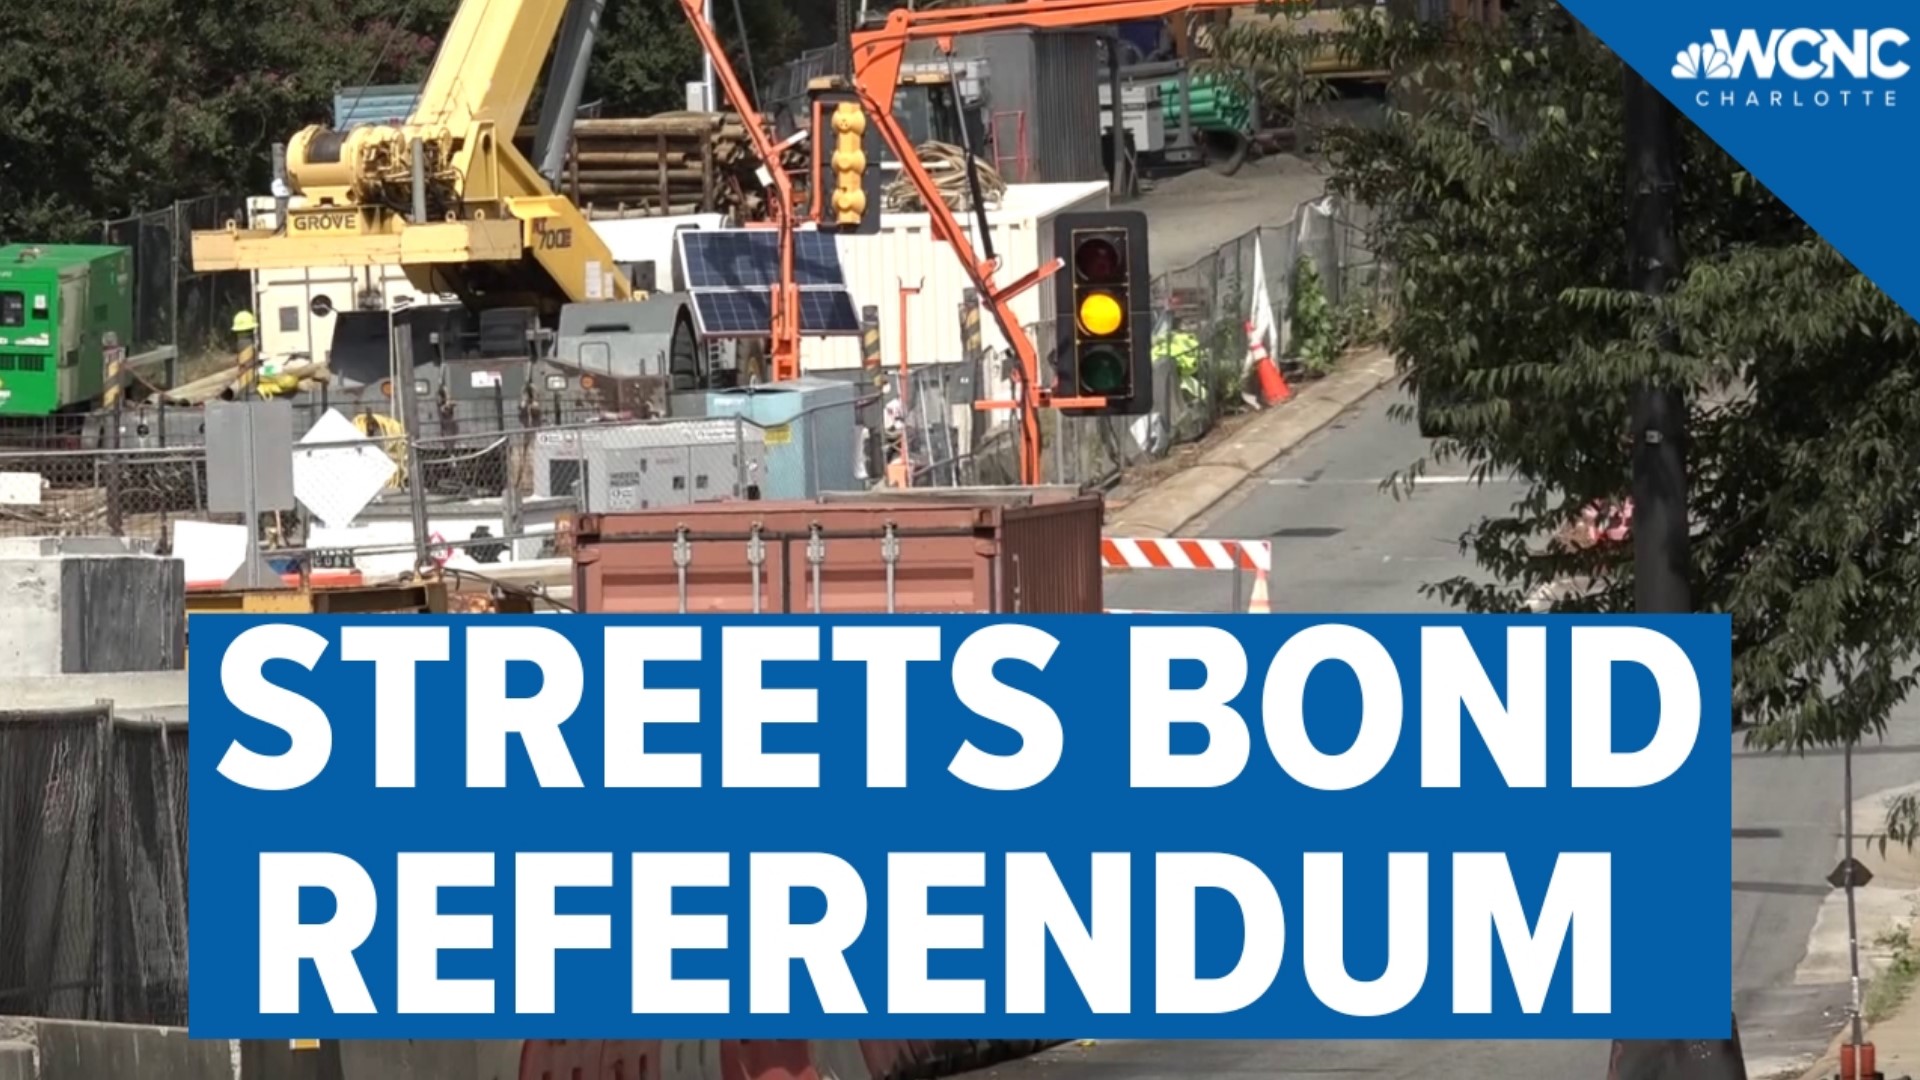 Charlotte voters will have an opportunity to choose whether the city gets to spend $146.2 million on its streets over the next decade.